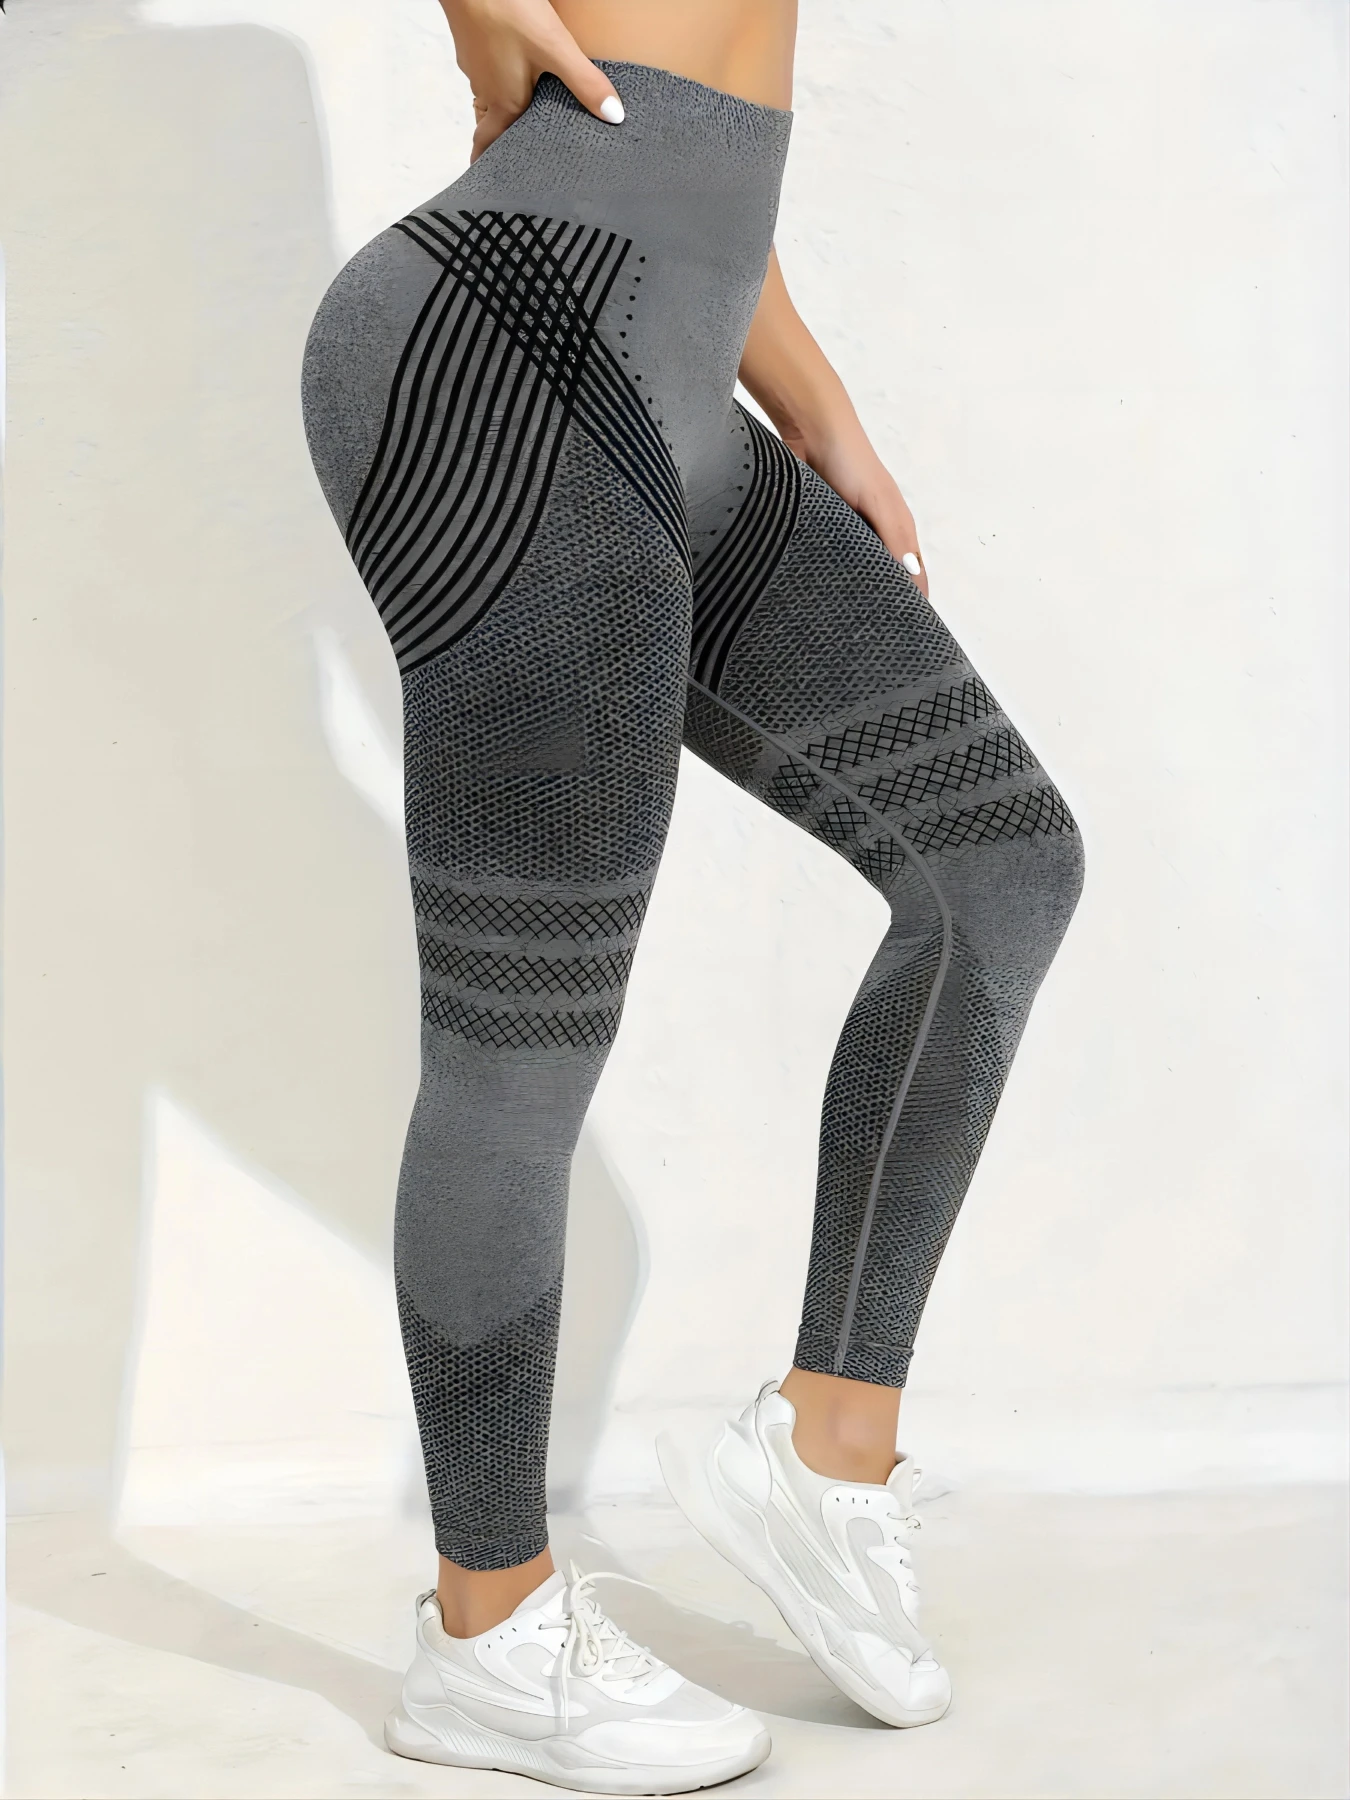 S03878098ea3f4c0193e246b02d4fc5bbA Seamless High Waisted Workout Leggings for Women Scrunch Butt Lifting Yoga Gym Athletic Pants